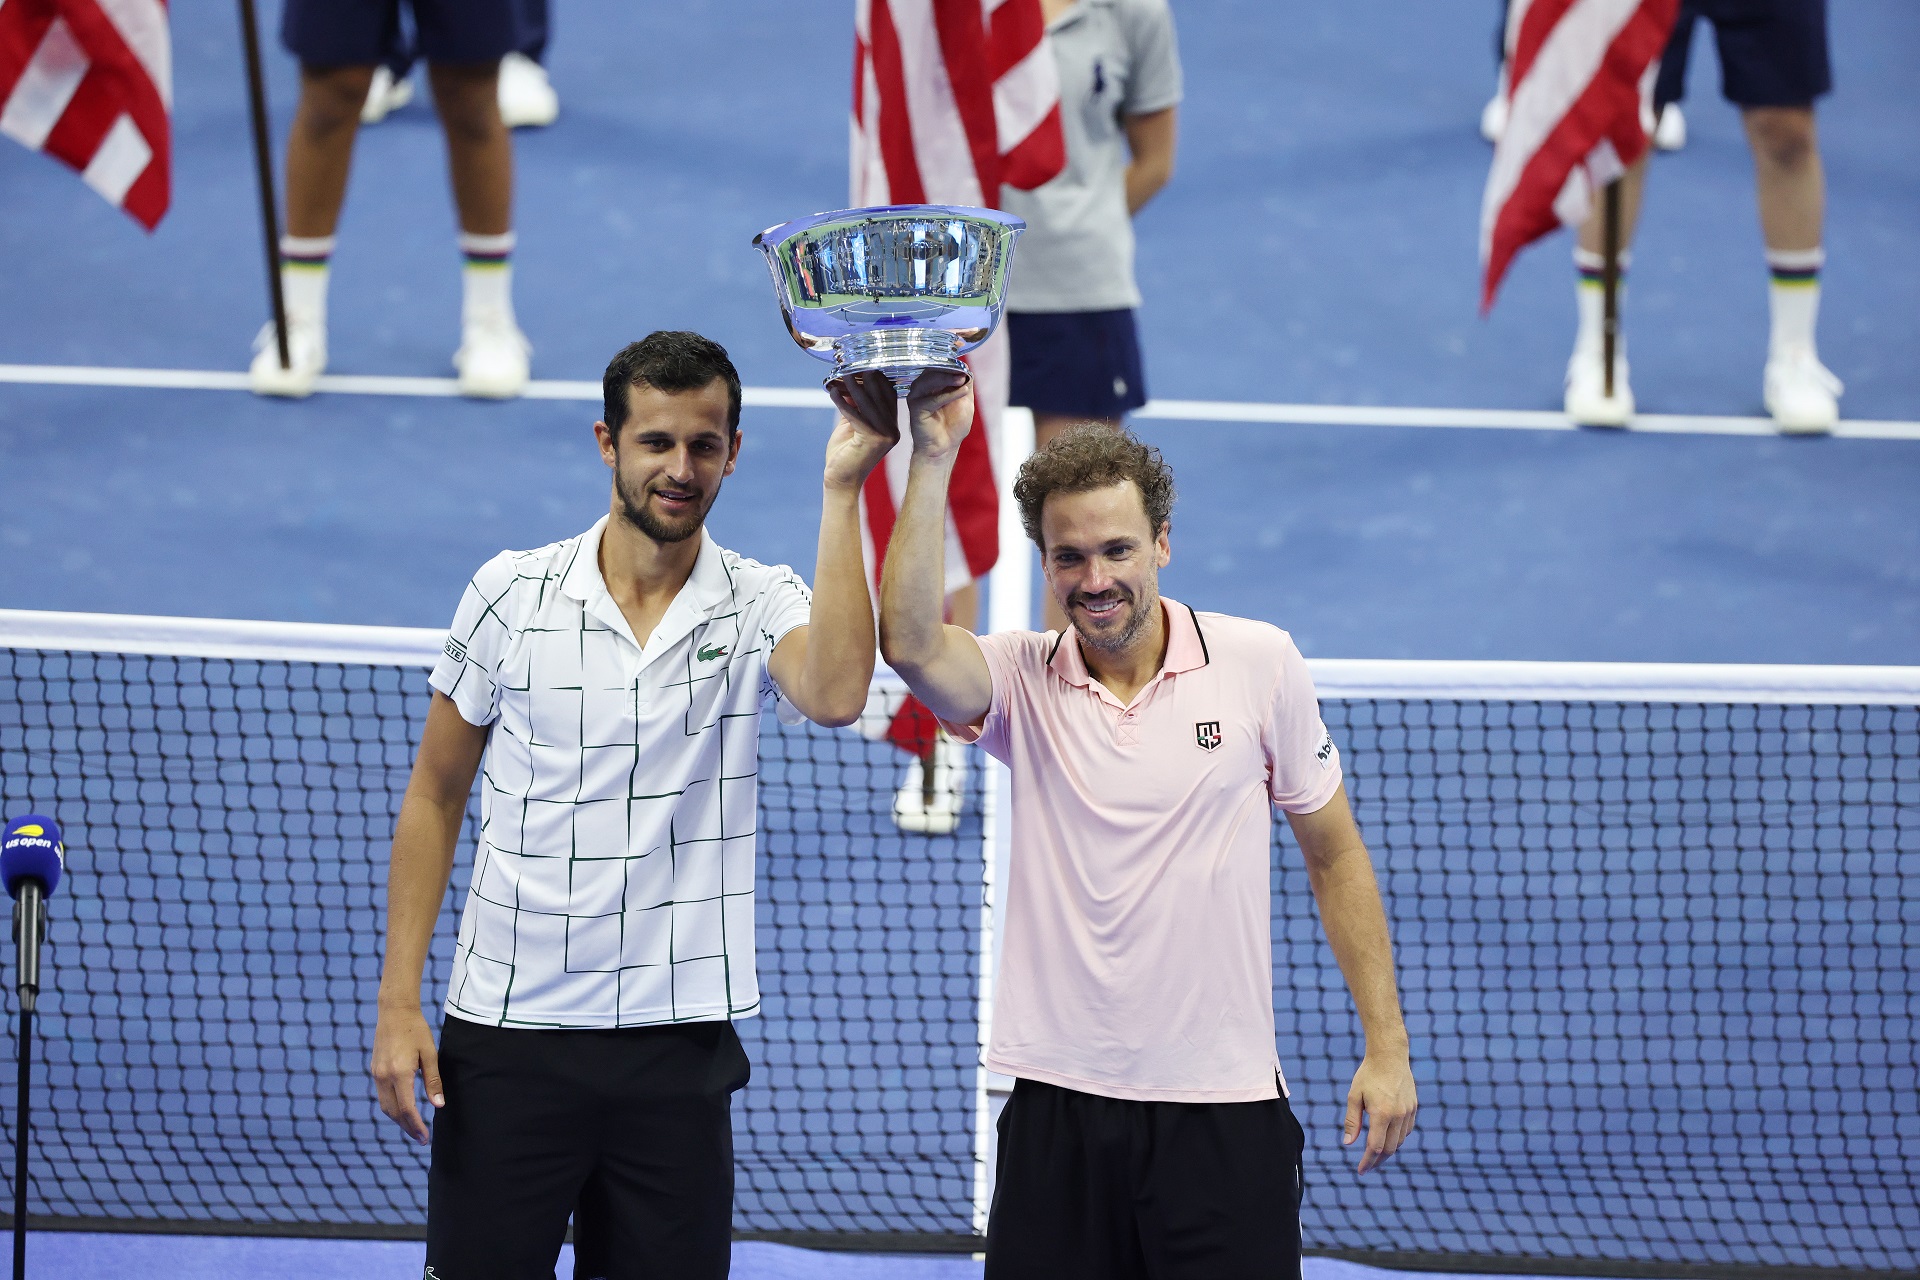 epa08660077 Mate Pavic of Croatia (L) and Bruno Soares of Brazil (R) celebrate with the Championship Trophy after defeating Wesley Koolhof of the Netherlands and Nikola Mektic of Croatia in the men's doubles final match on the eleventh day of the US Open Tennis Championships the USTA National Tennis Center in Flushing Meadows, New York, USA, 10 September 2020. Due to the coronavirus pandemic, the US Open is being played without fans and runs from 31 August through 13 September.  EPA/JUSTIN LANE